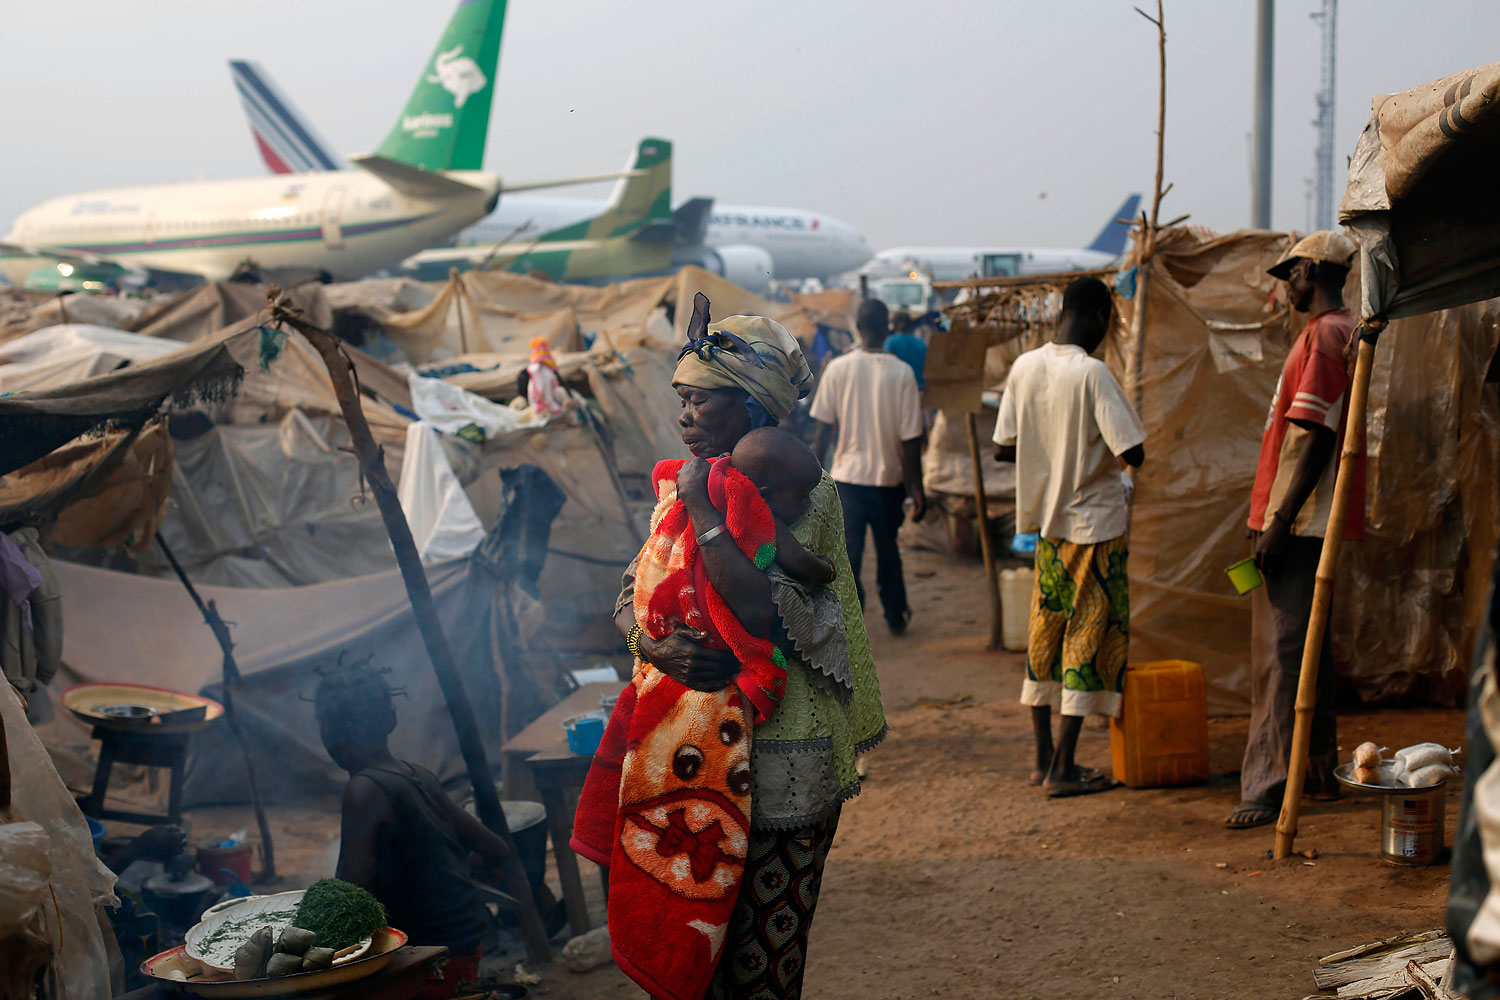 Christian refugees living in makeshift shelters near the airport in Bangui, Jan. 28, 2014, as they try to escape from the deepening divisions between the country's Muslim minority and Christian majority.